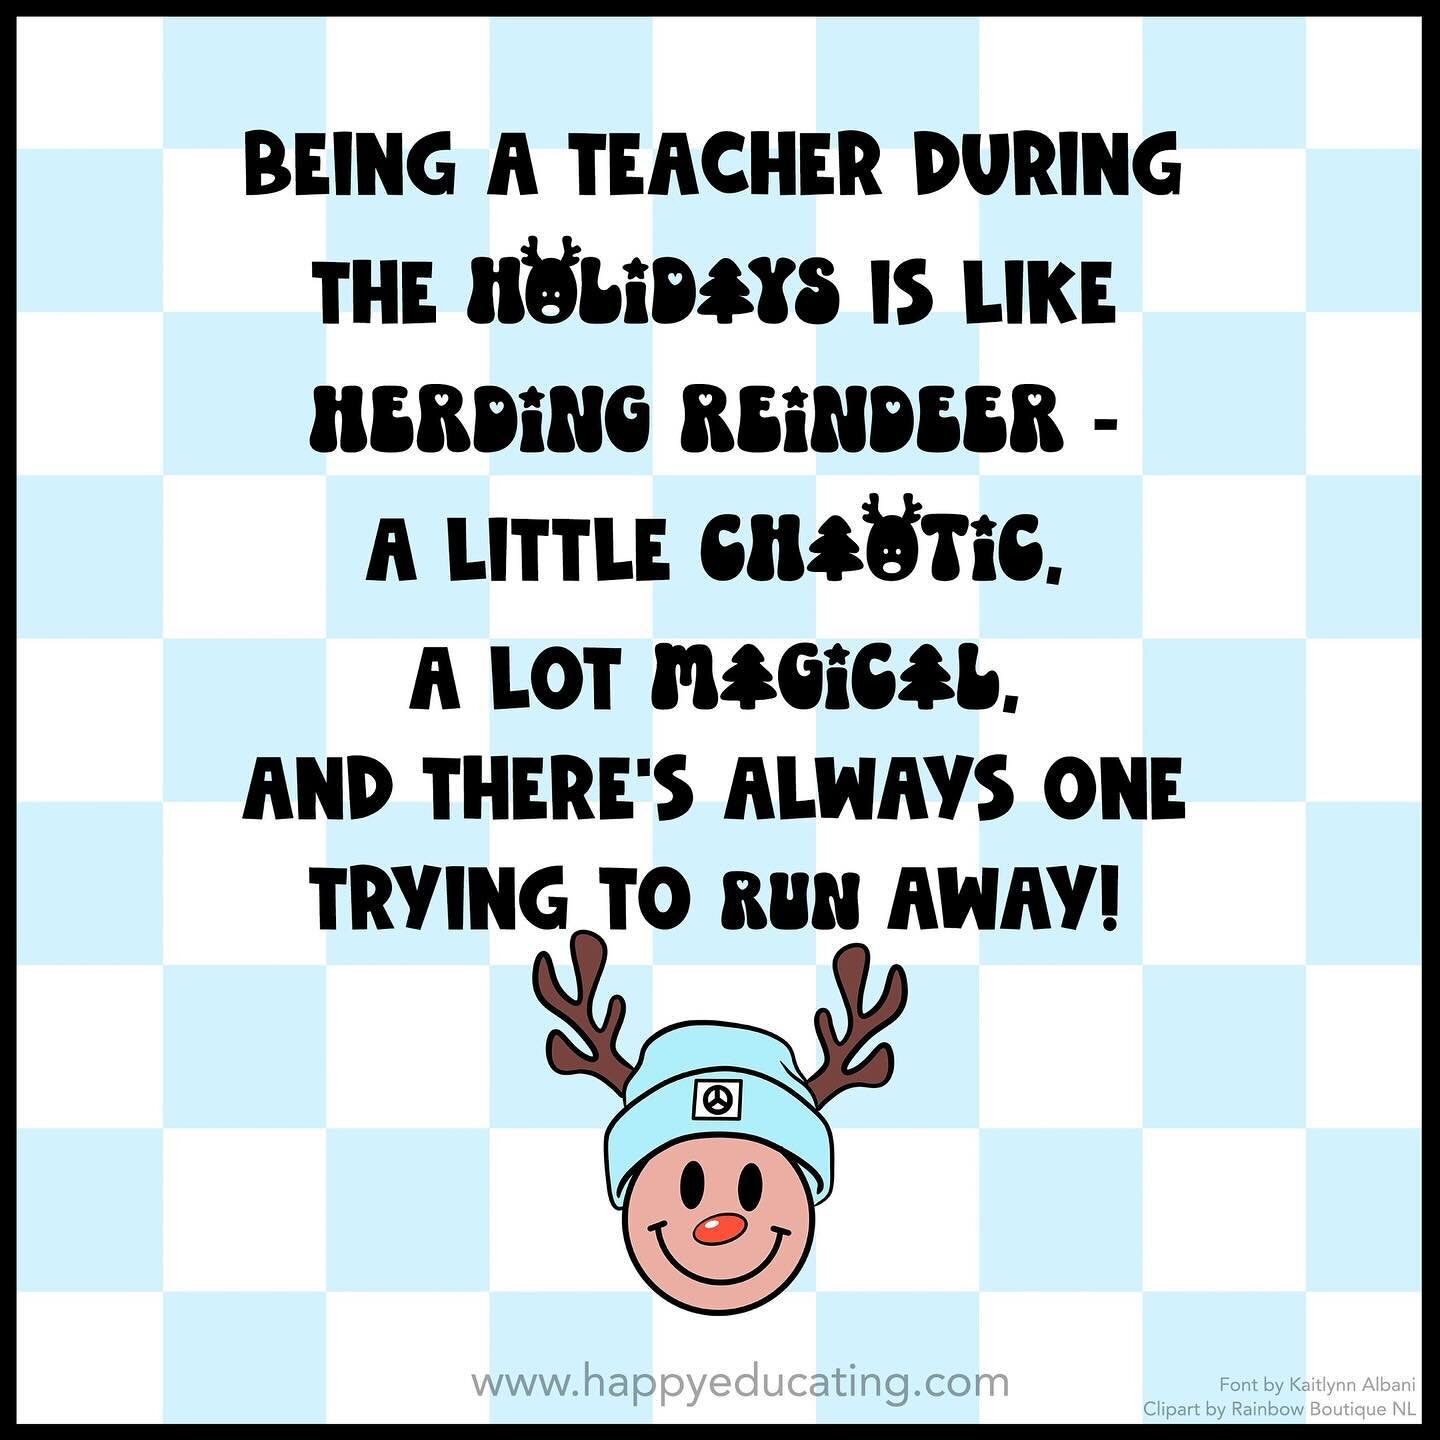 Embracing the festive chaos in the classroom like a holiday jingle!  Wrapping up lessons, decking the halls, and managing the merriment - teachers, you&rsquo;re the real MVPs of this joyful season! Here&rsquo;s to the beautiful chaos that makes memor